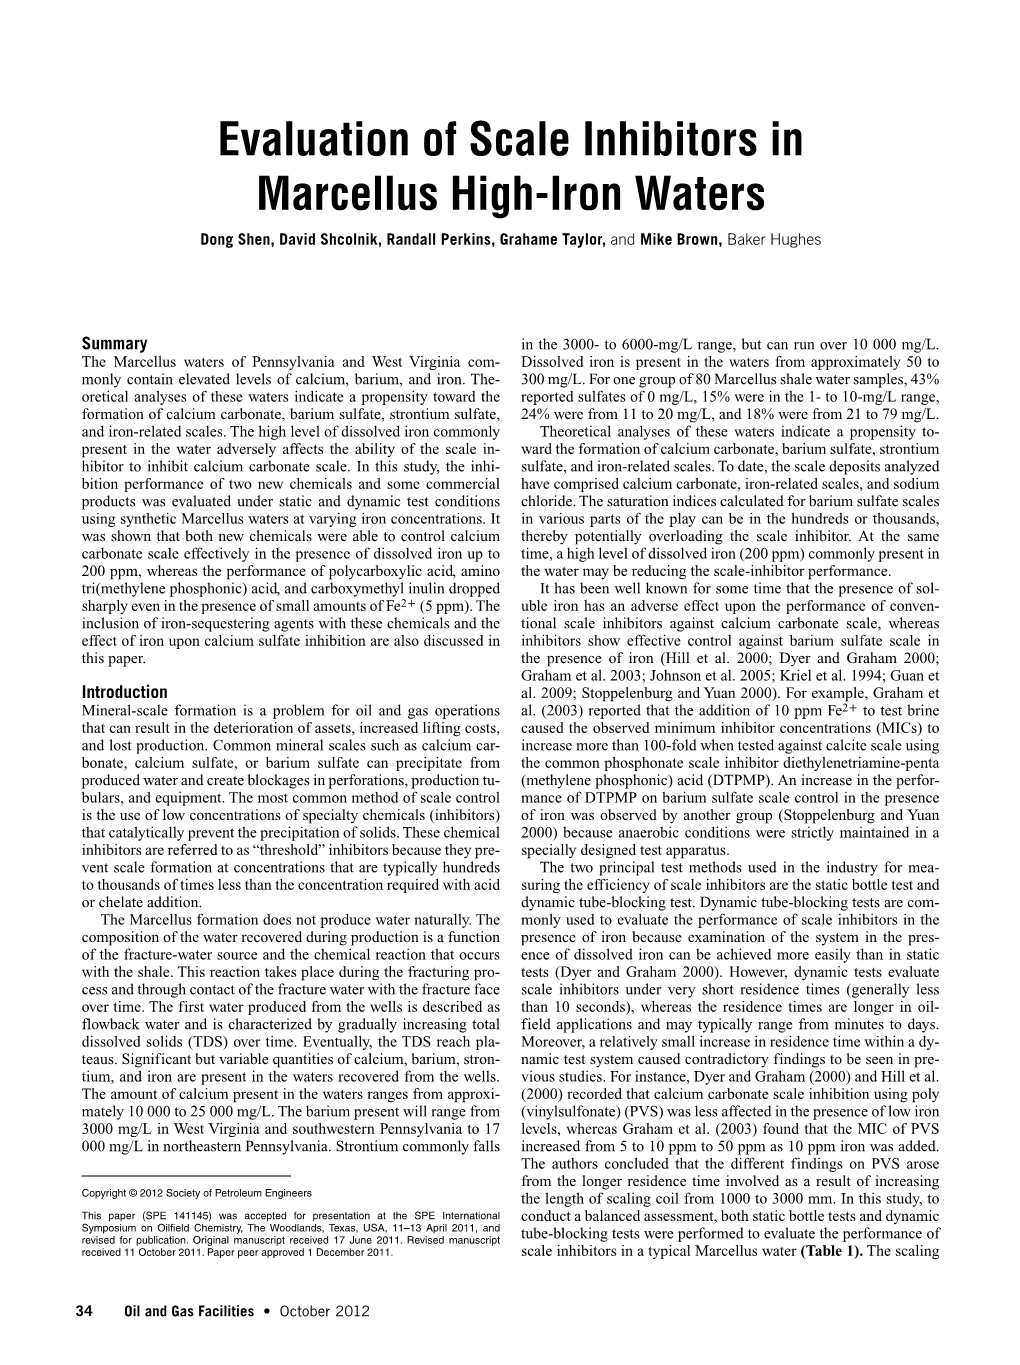 Evaluation of Scale Inhibitors in Marcellus High-Iron Waters